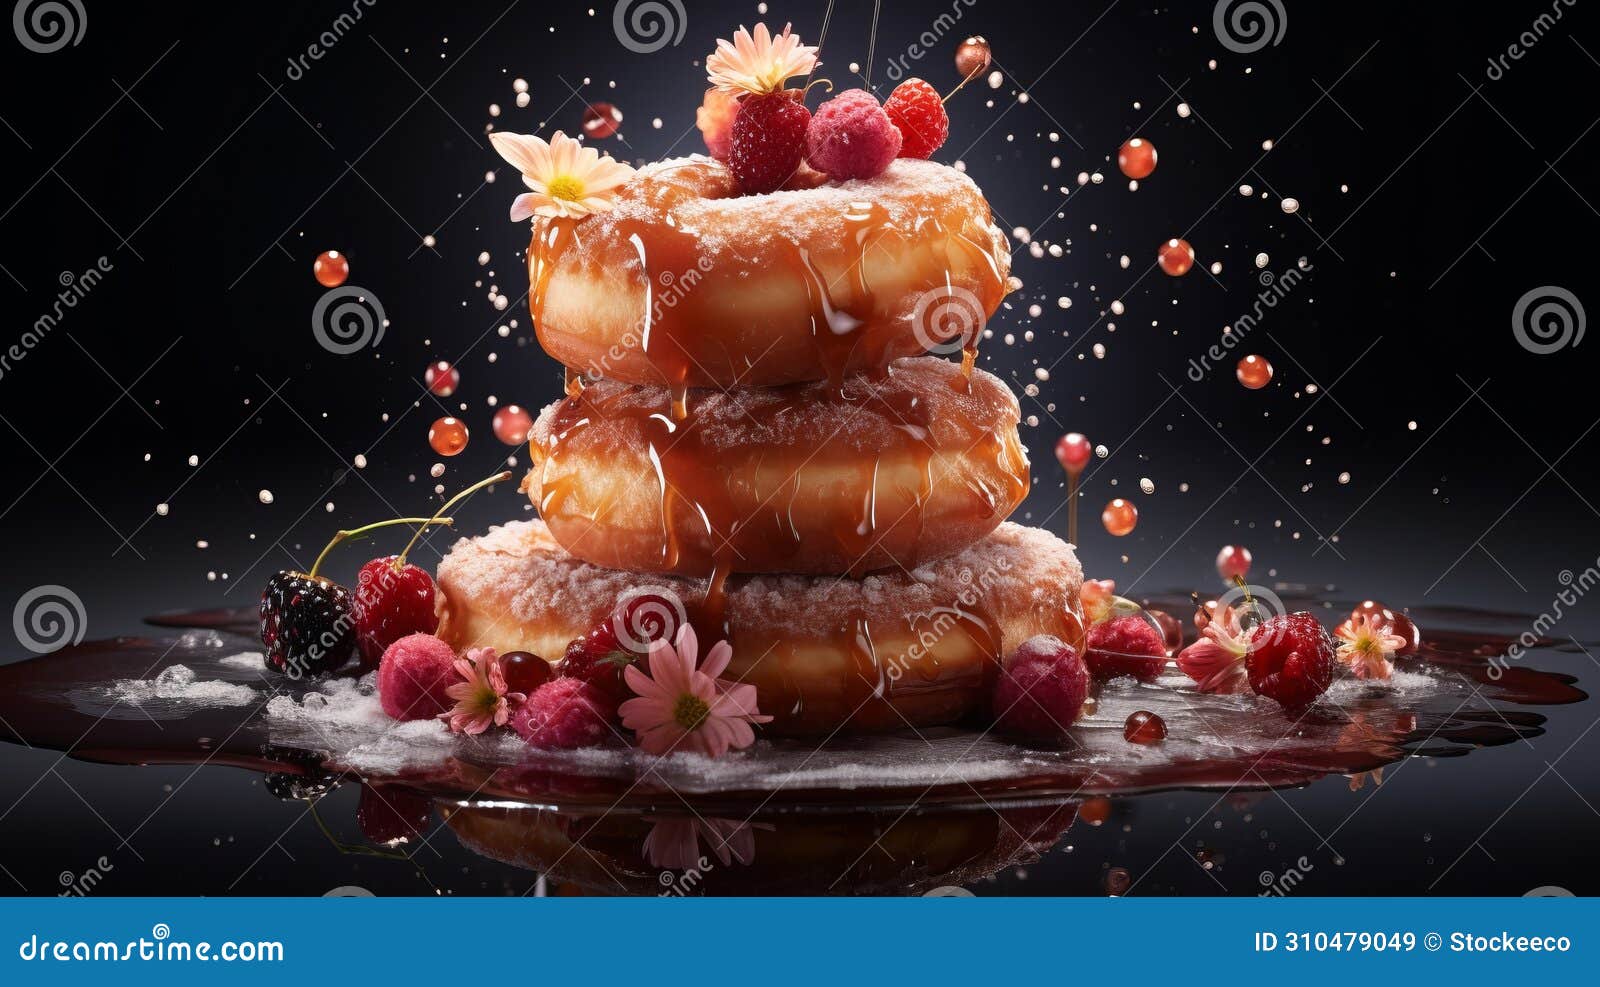 immersive doughnuts: a fusion of olivier ledroit, miki asai, and herve guibert